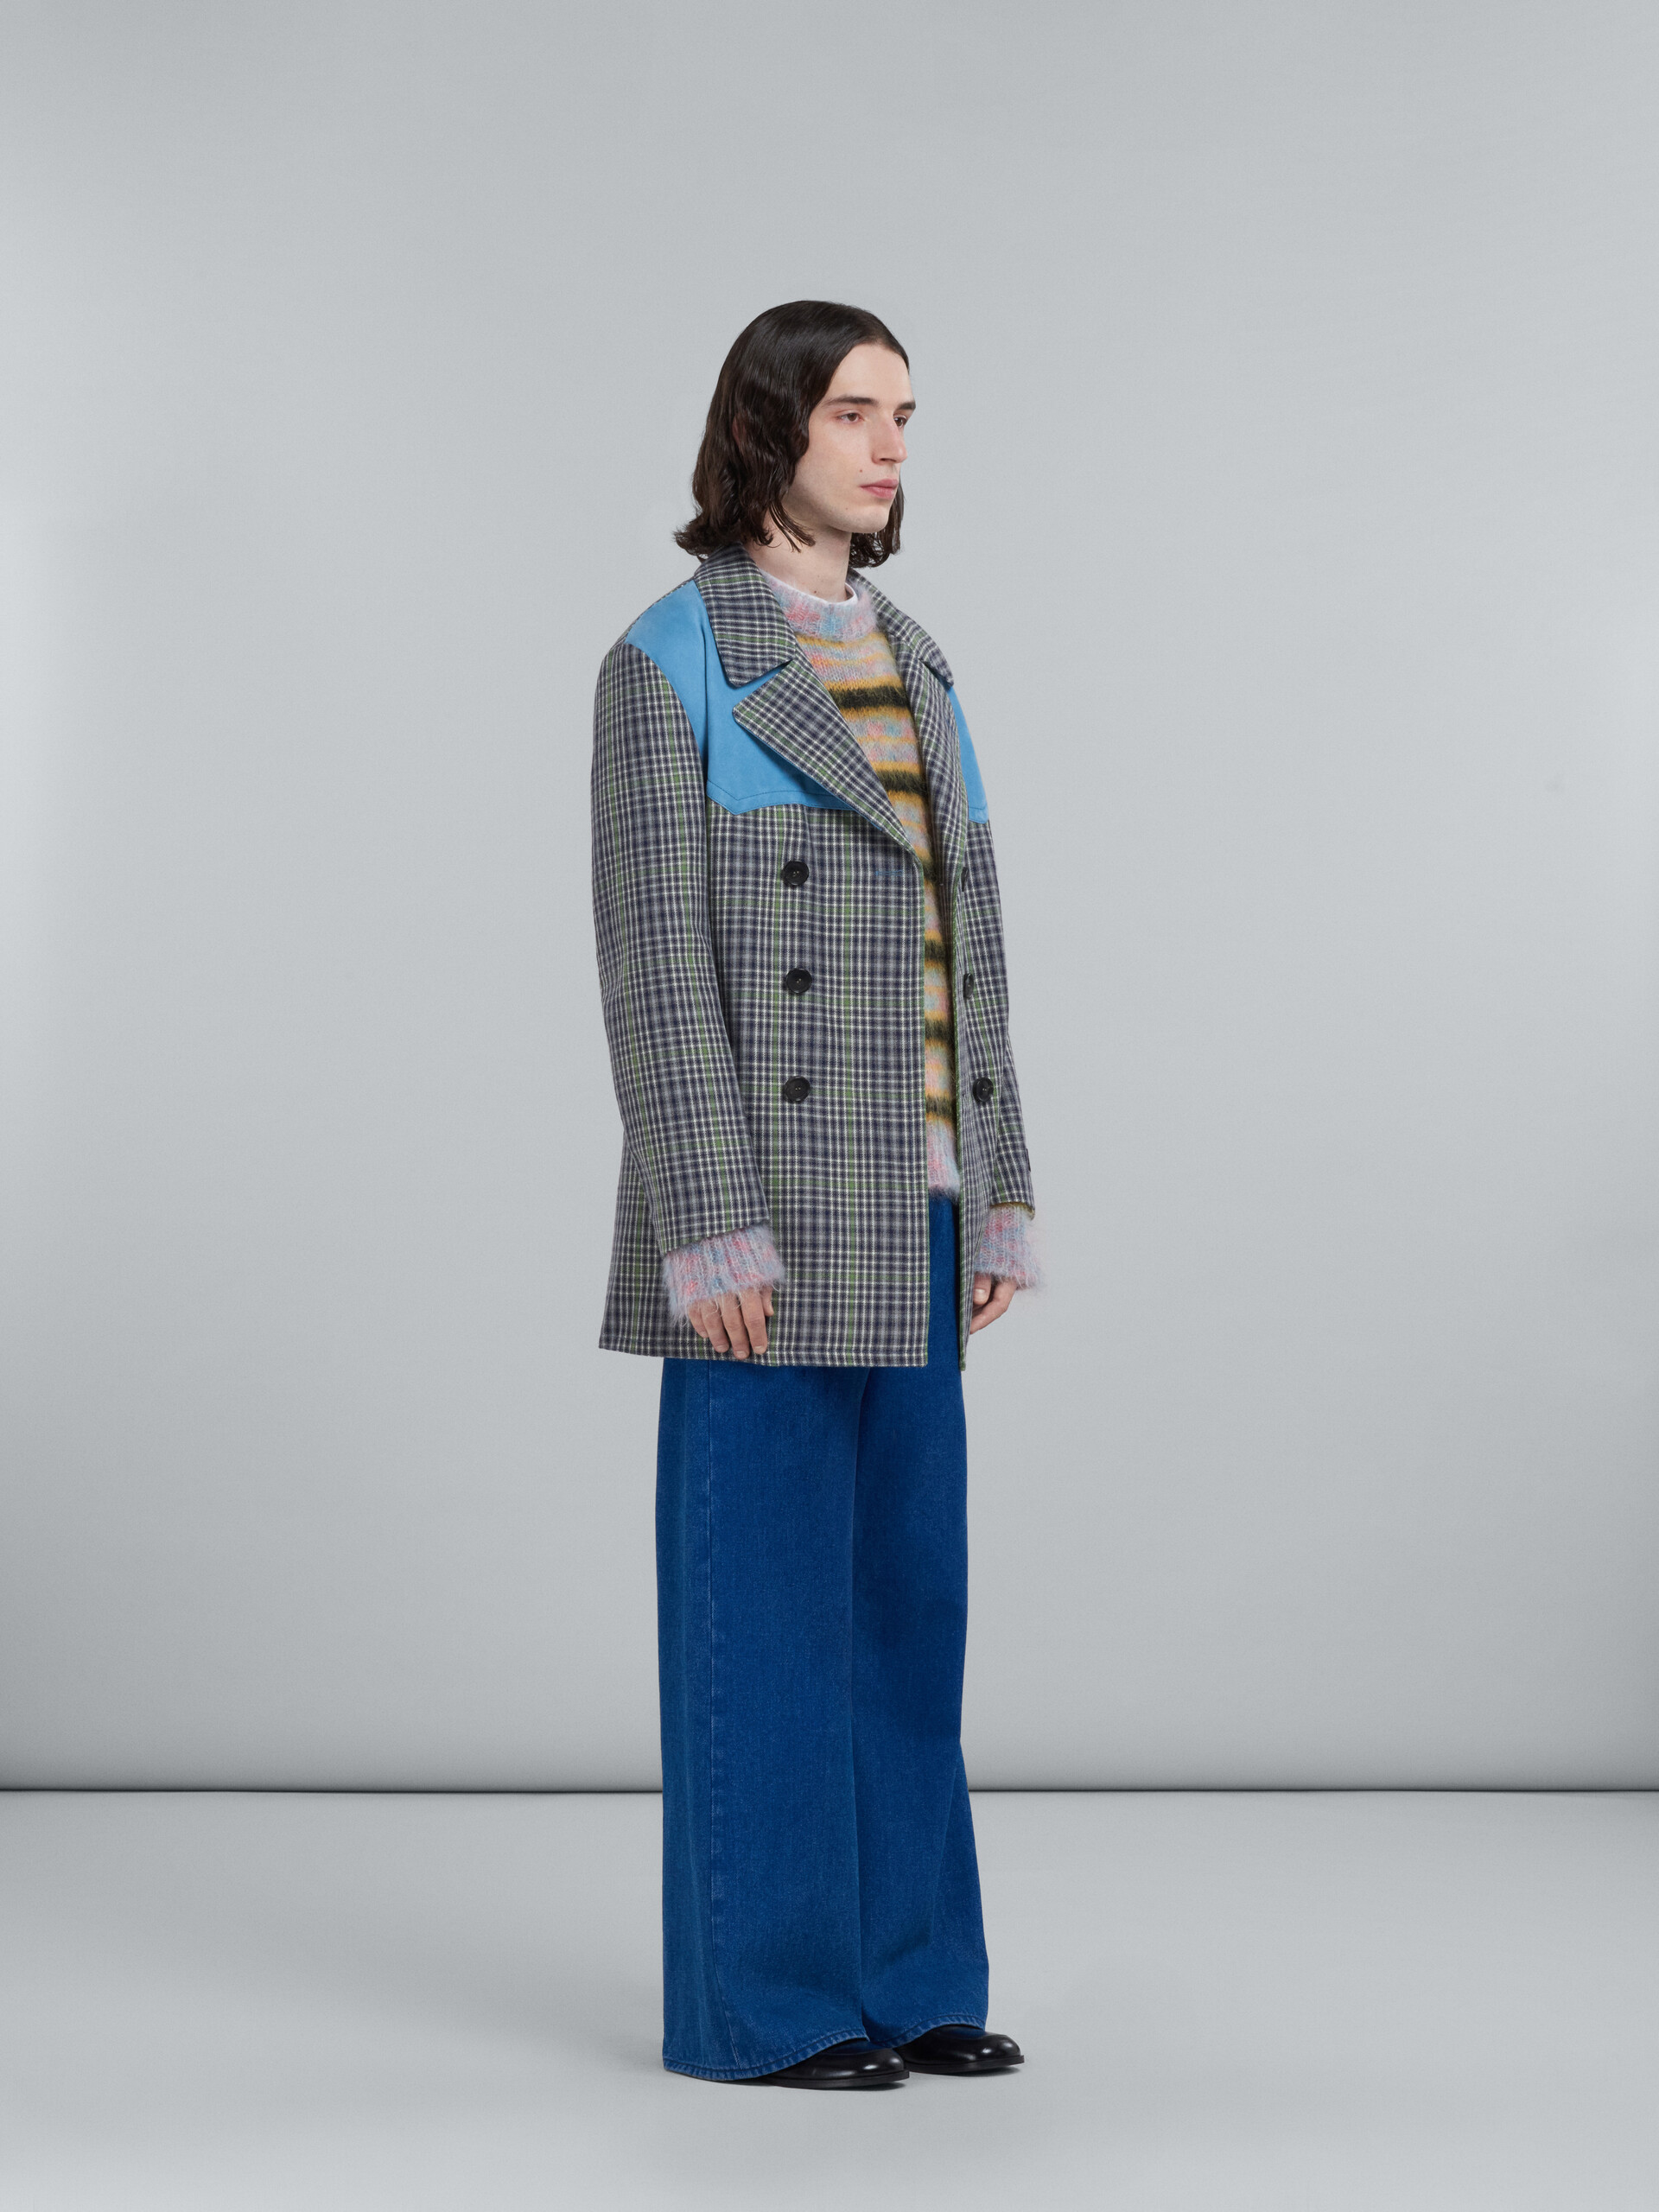 Double-breasted coat in grey chequered wool - Coat - Image 6